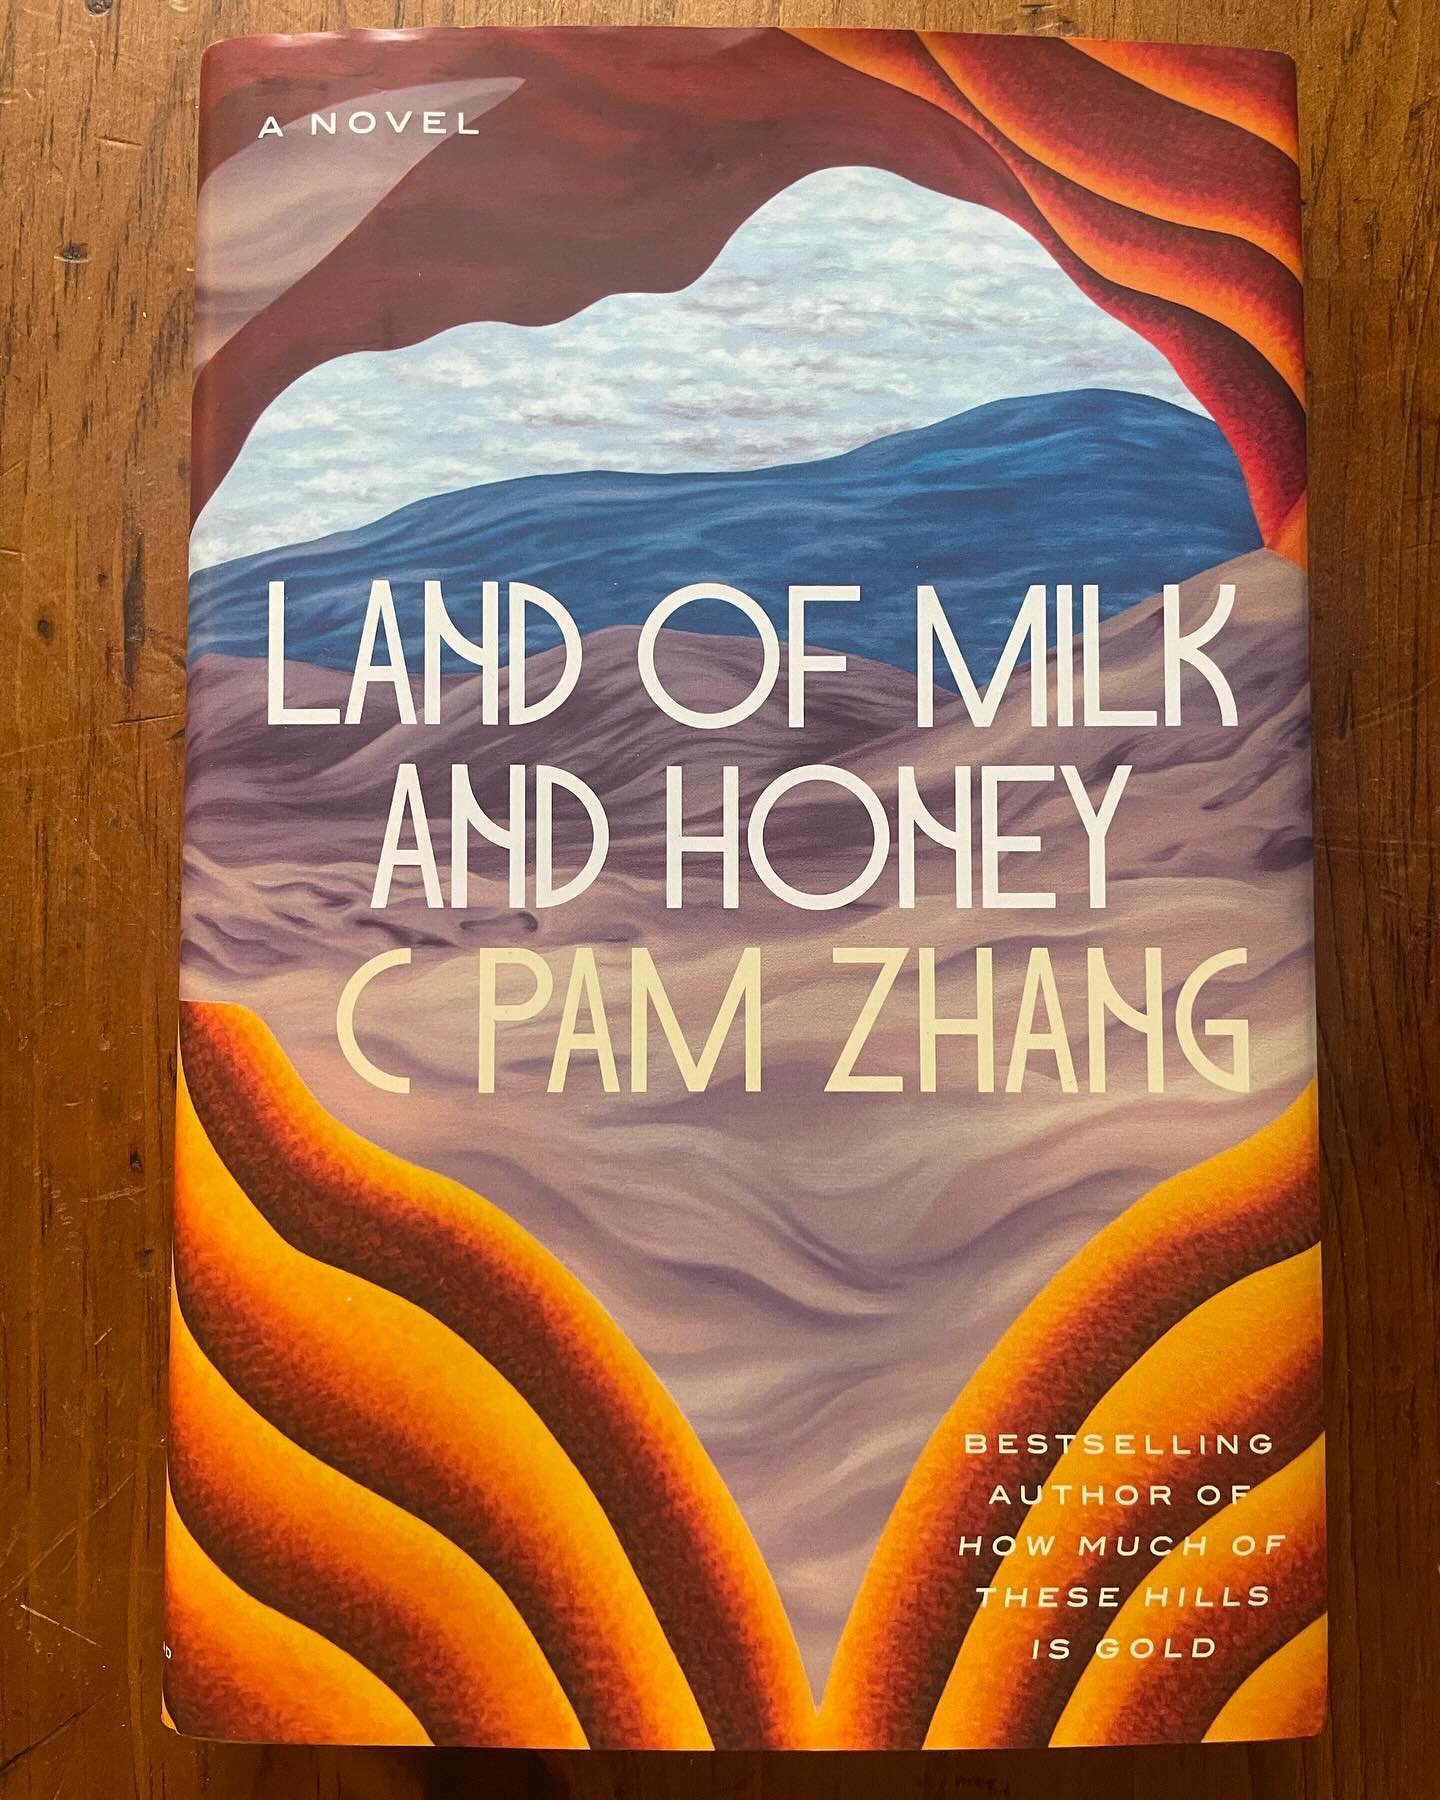 Picked this up on Indie Bookstore Day last weekend @litthomeandbook and devoured it!🥛🍯Highly Recommended! 

#landofmilkandhoney @cpamzhang